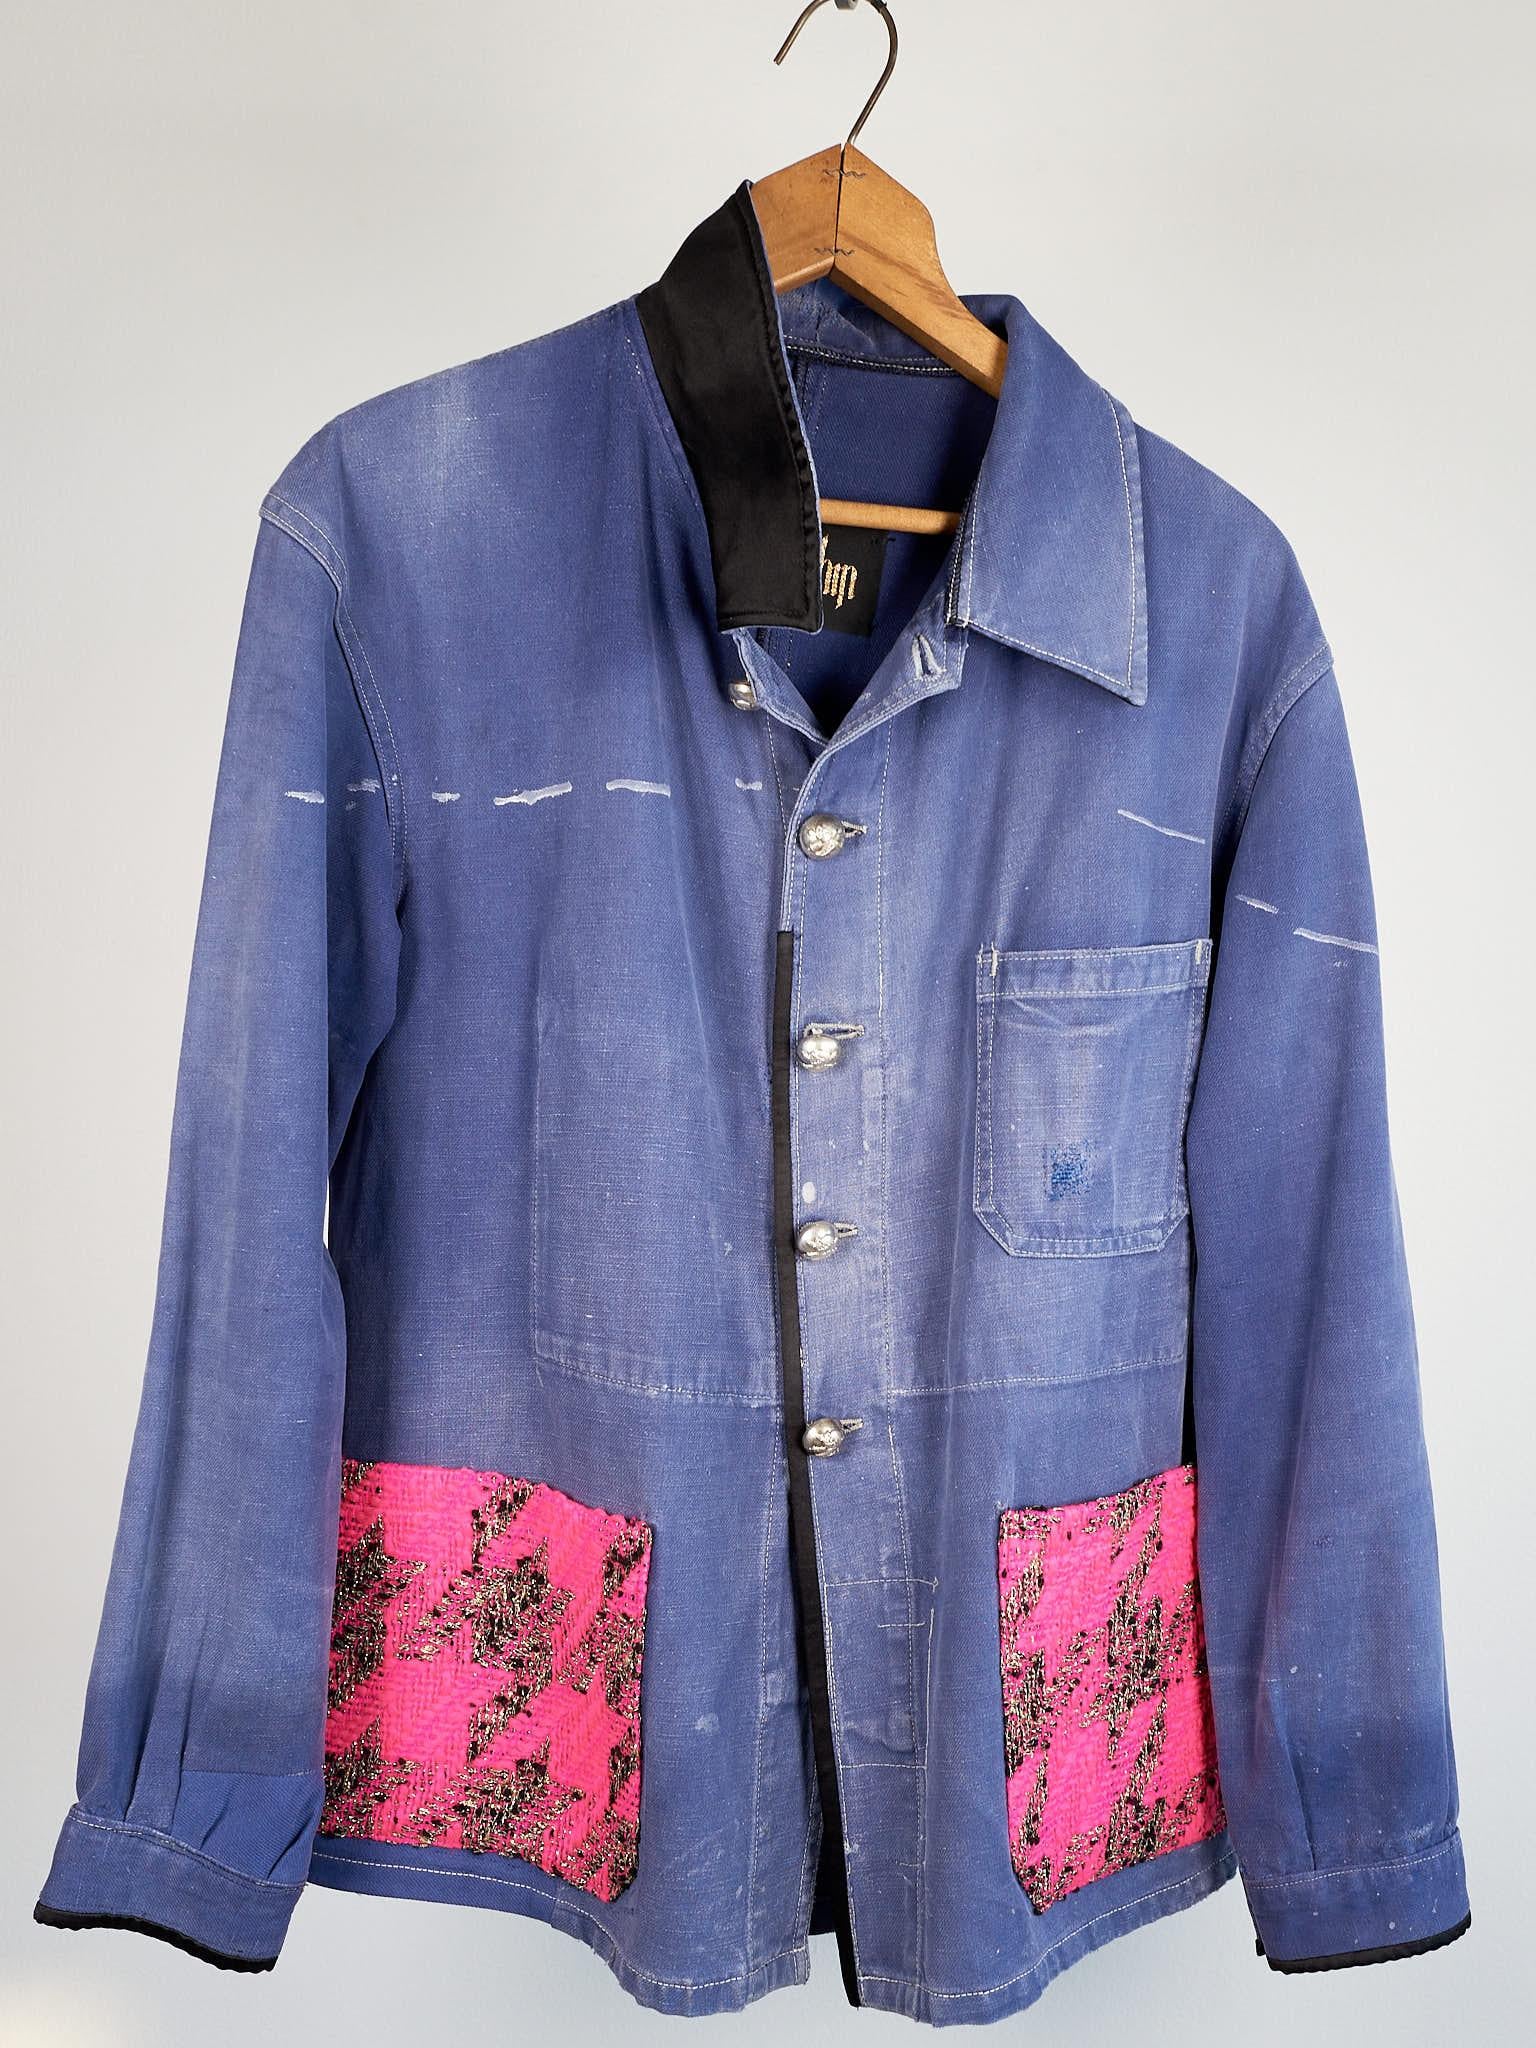 Repurposed Vintage Jacket French Blue Work Wear Neon Pink Tweed Small
One of a Kind Collectible Jacket Originally Made in France around the 60's
100% Sustainable
Designer: J Dauphin 
Size: Small

Size: S / FR 38 / IT 40 / EU 36 / UK 8 

This One of